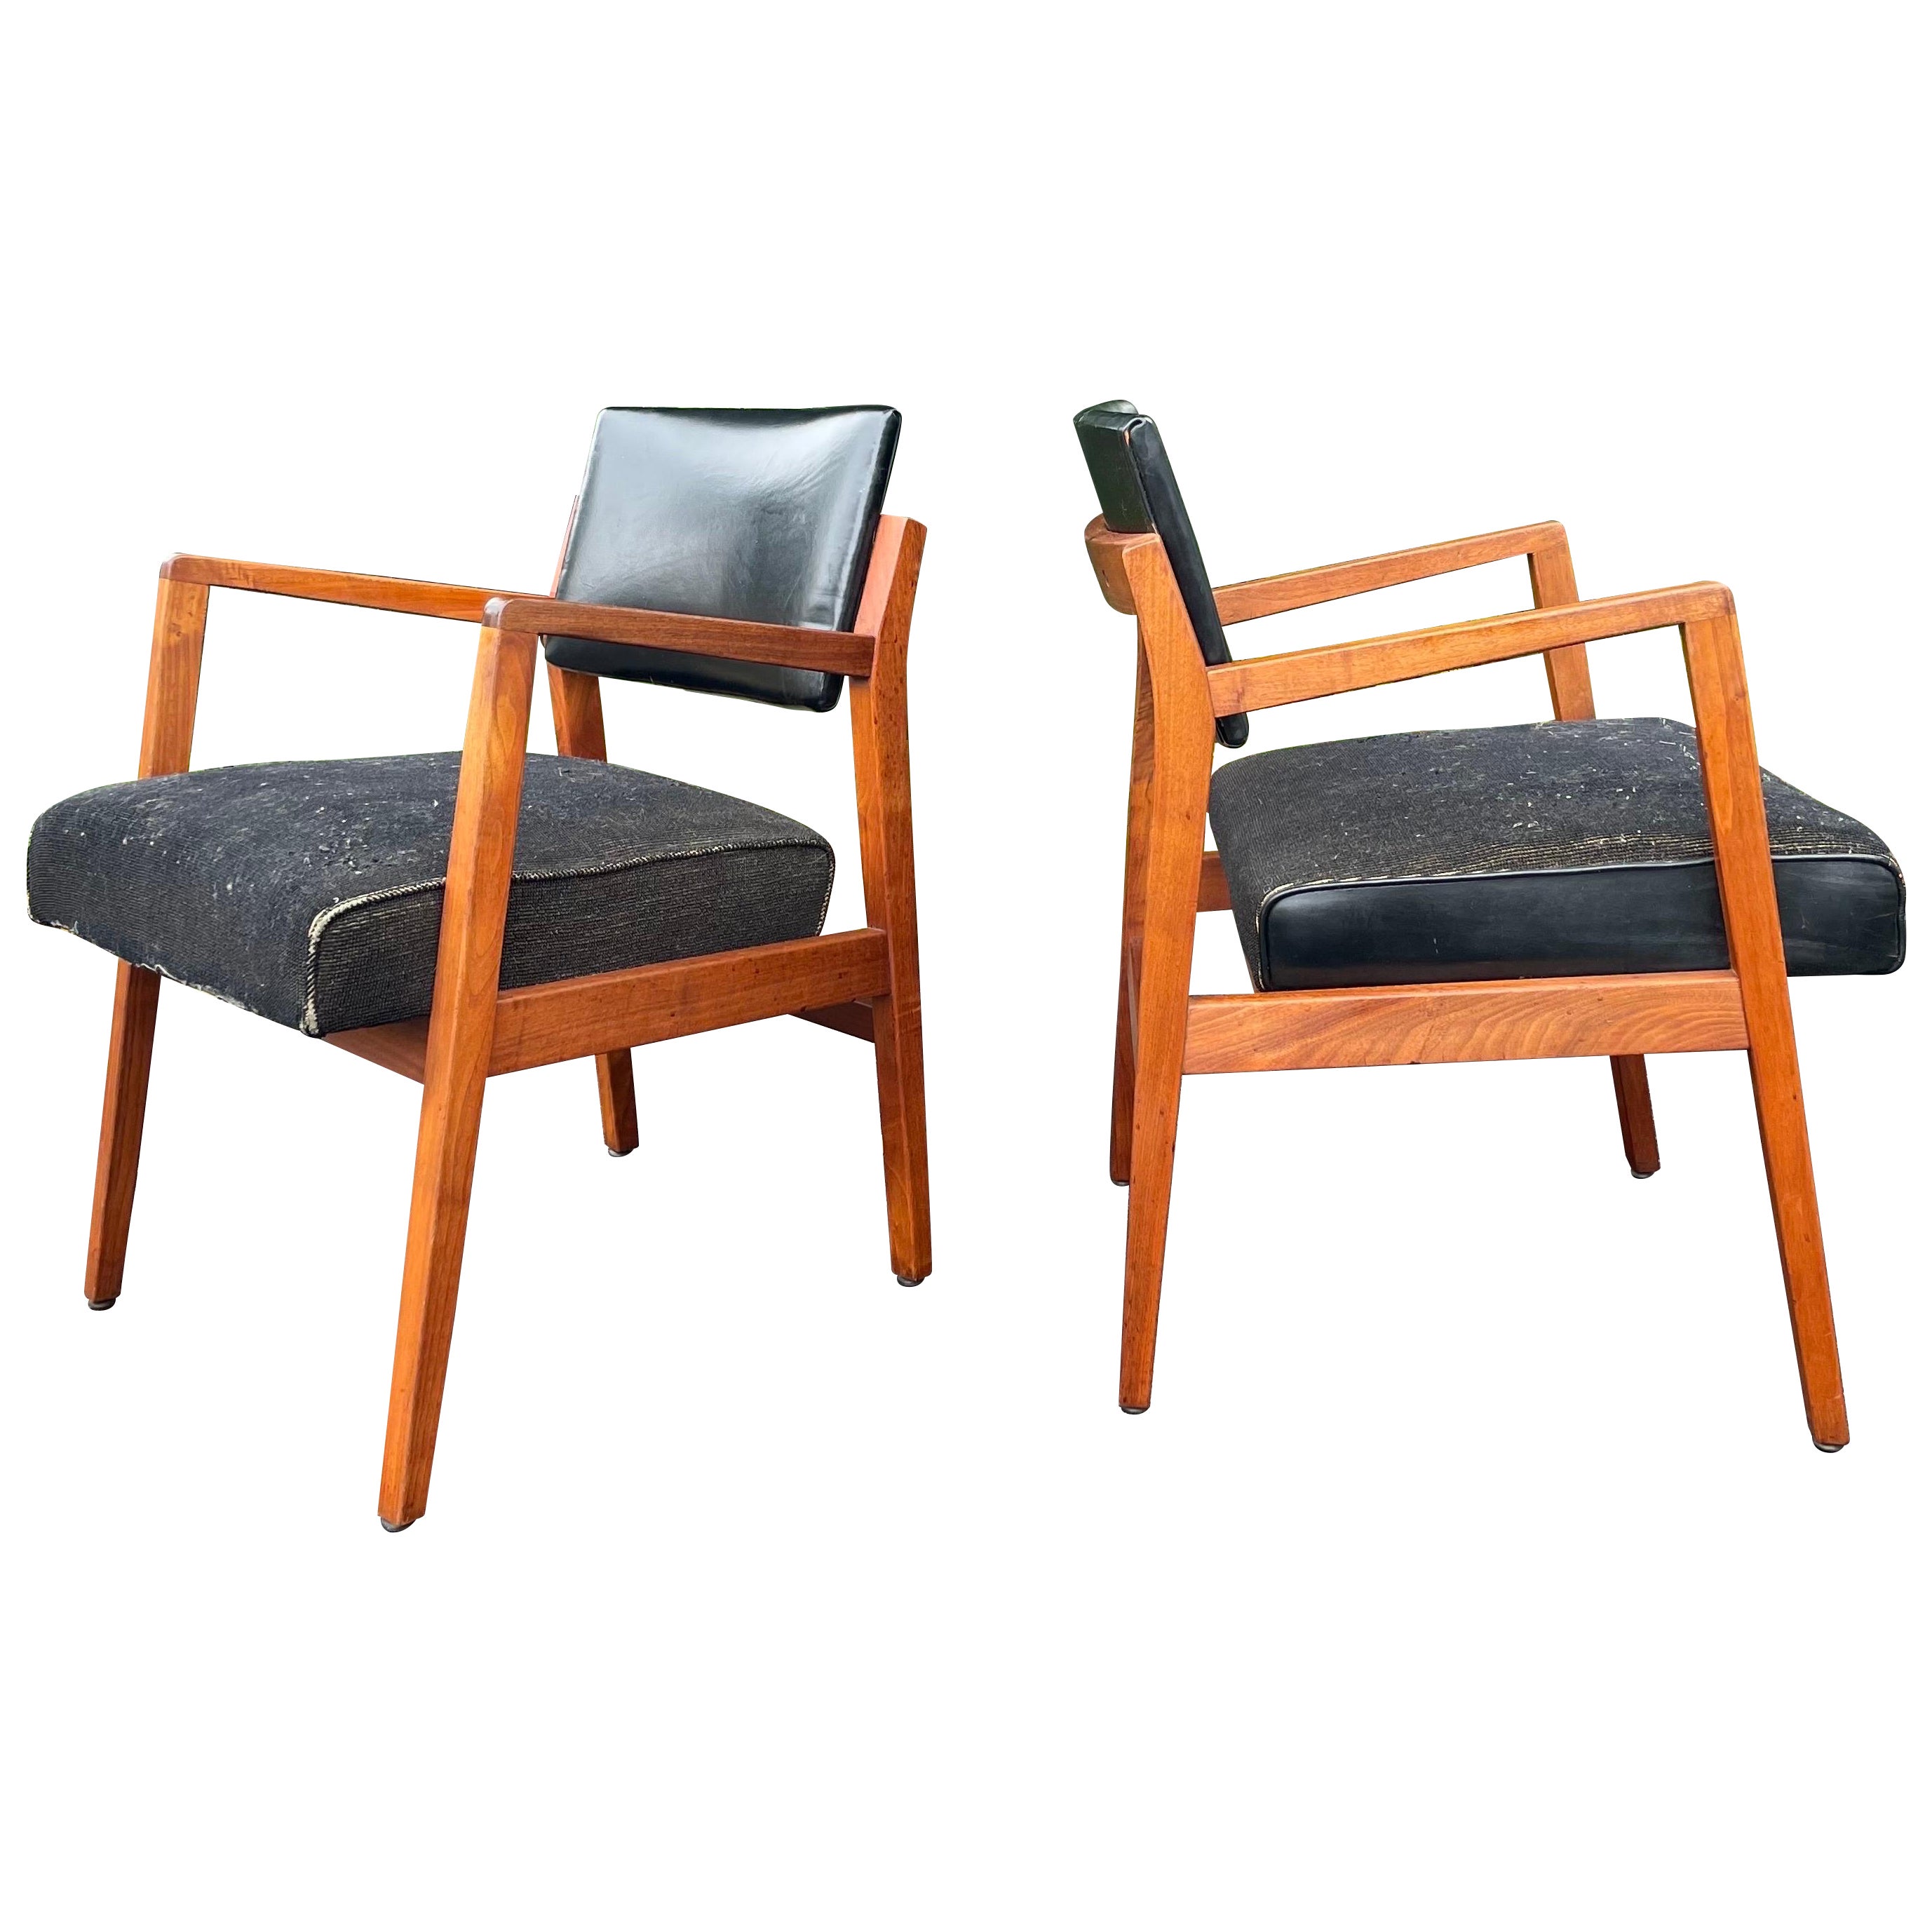 1950s Jens Risom Style Walnut Arm Chairs, a Pair For Sale